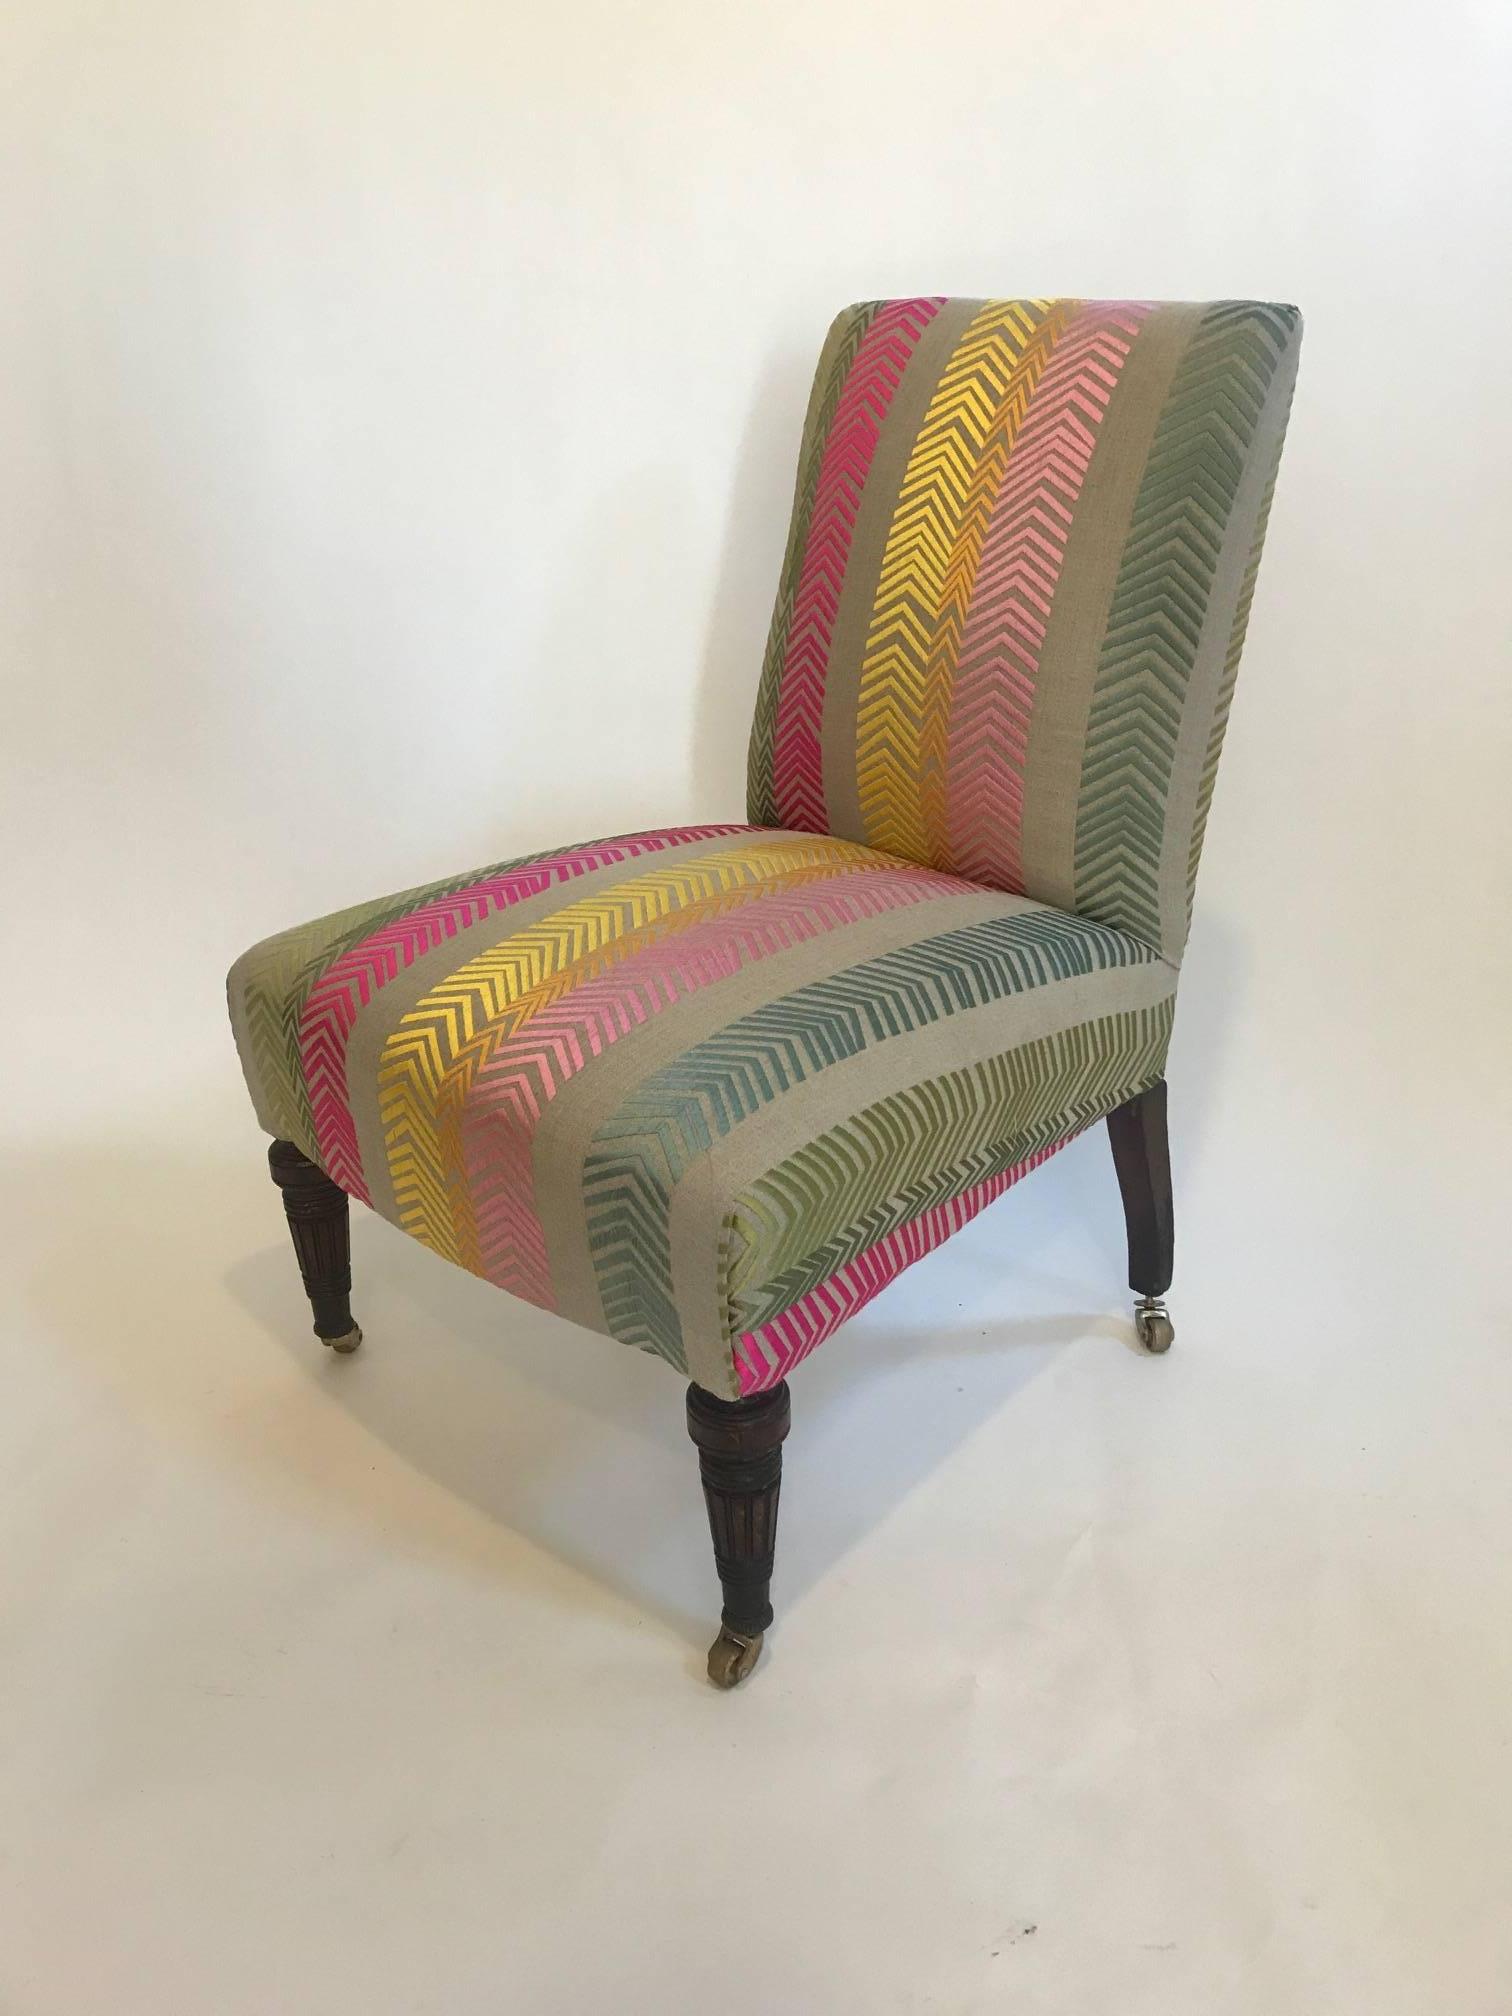 Early 20th century English square back side chair reupholstered in Christopher farr, bookend, fabric designed by Kit Kemp.
Back side of chair is upholstered in sage linen and features brass nail heads around perimeter of back. Legs on casters.